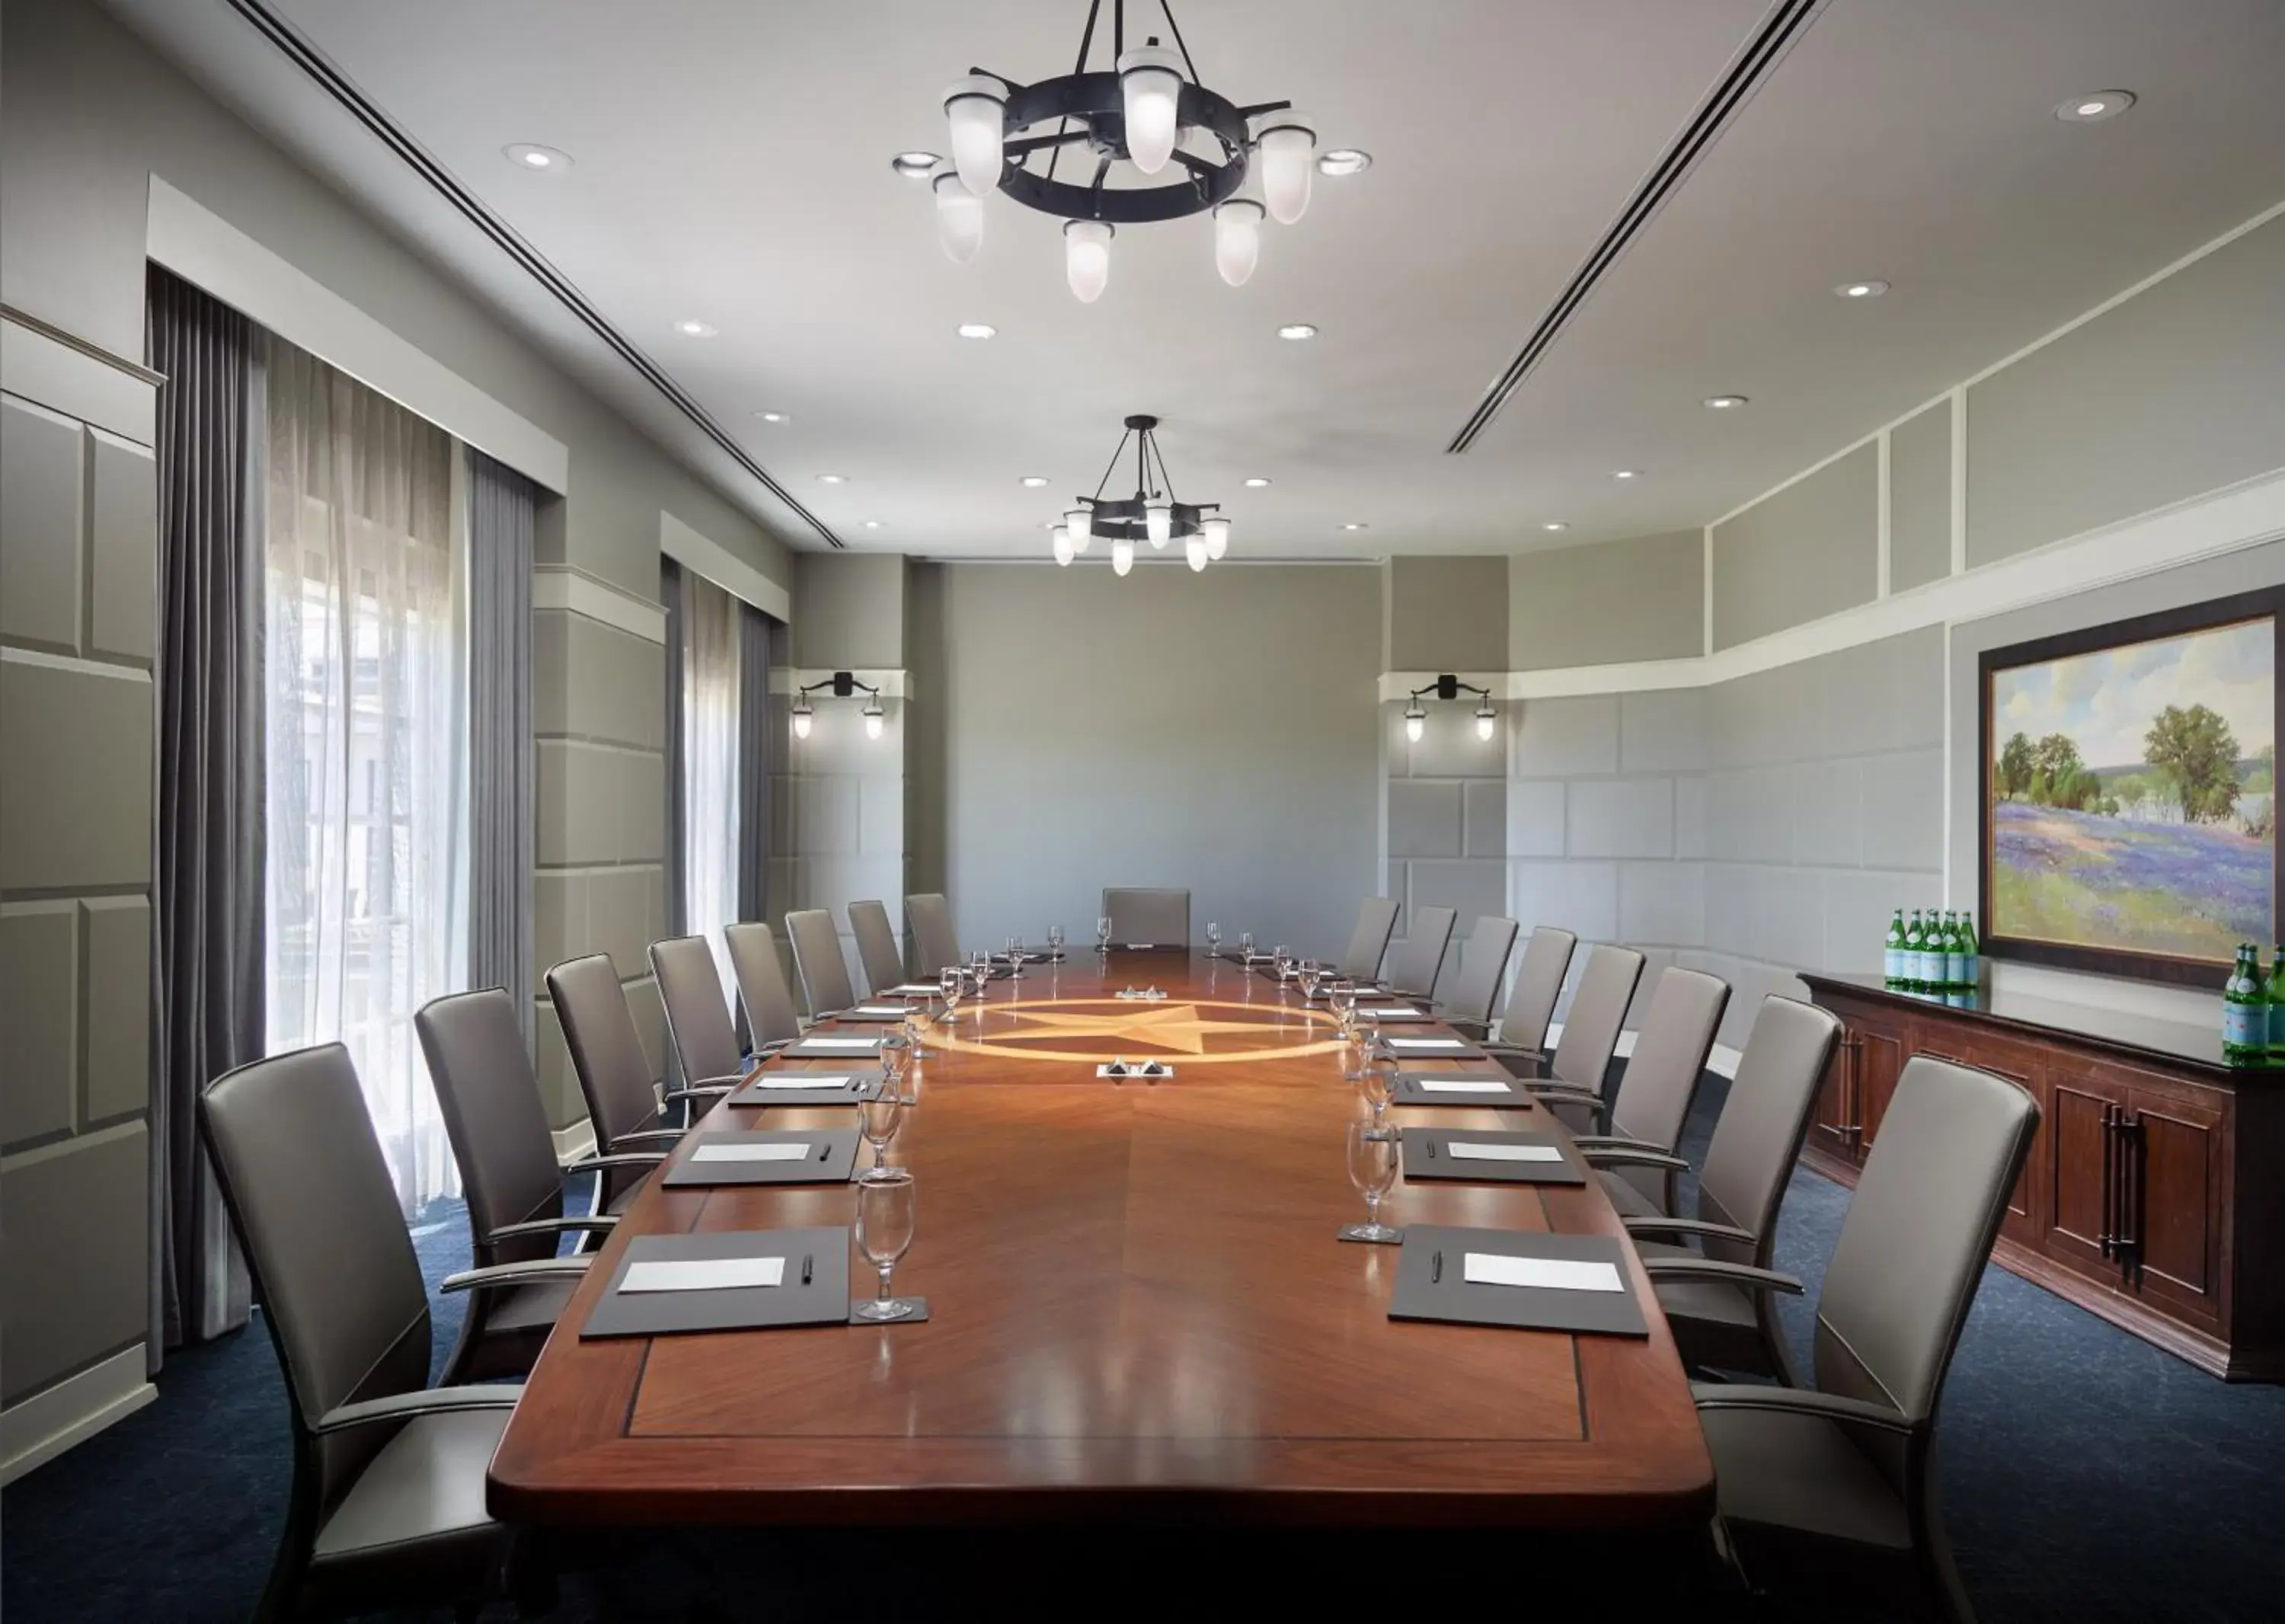 Meeting/conference room in Omni Barton Creek Resort and Spa Austin